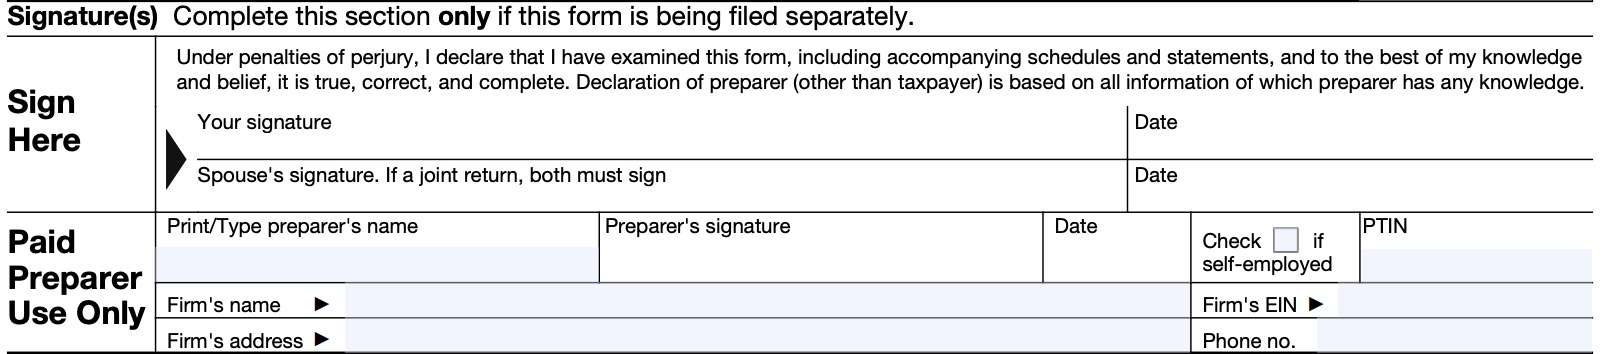 irs form 8697 taxpayer signature